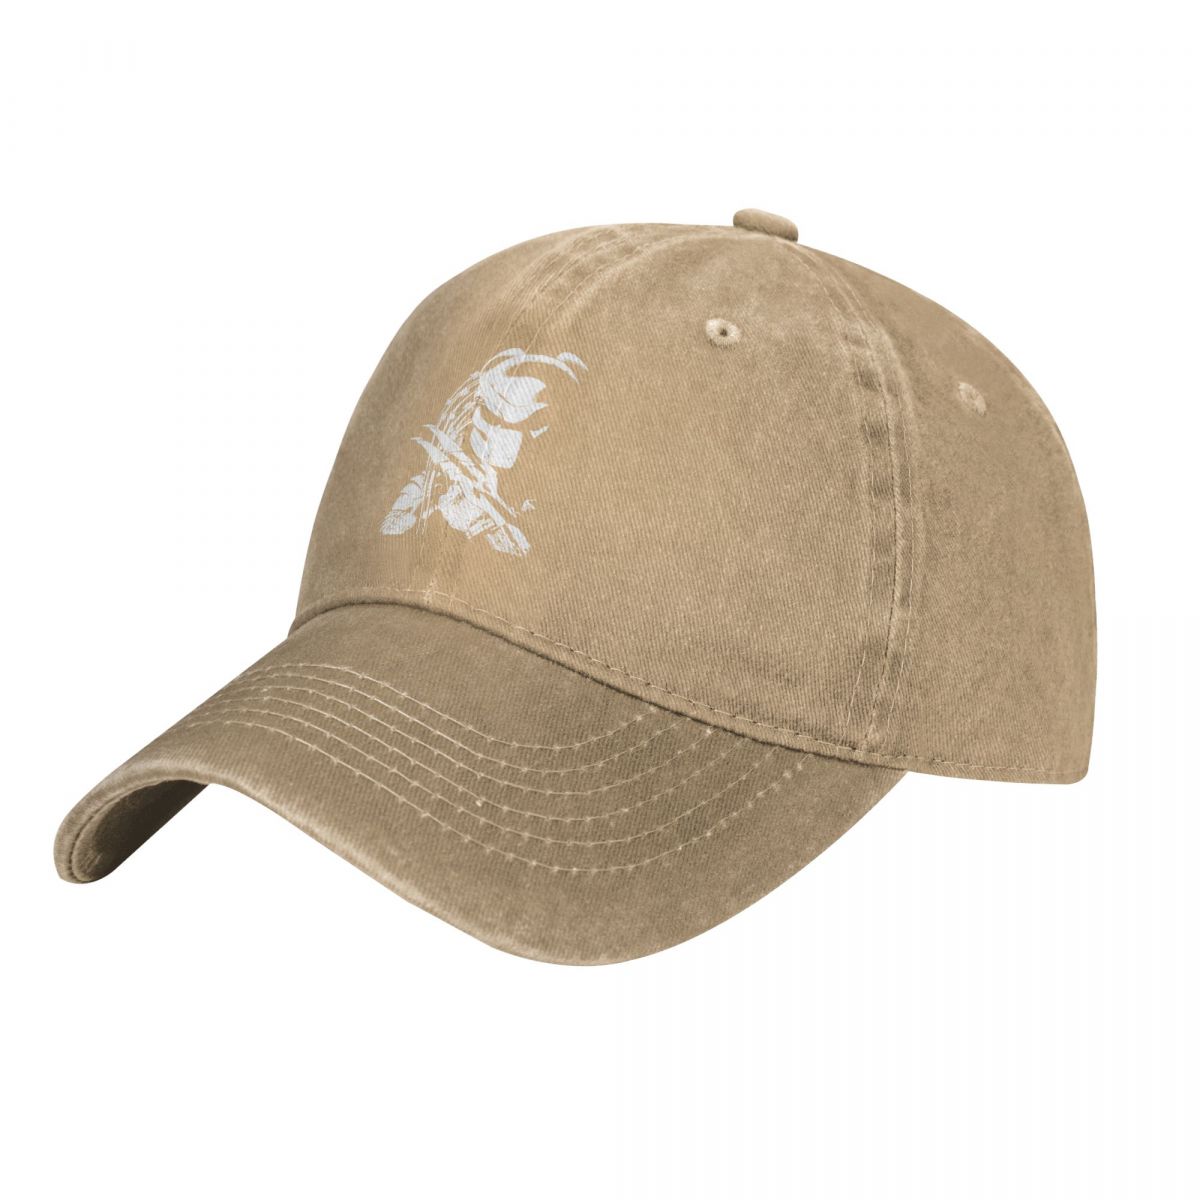 Predator - You Know It's Going Down - Snapback Baseball Cap - Summer Hat For Men and Women-Khaki-One Size-